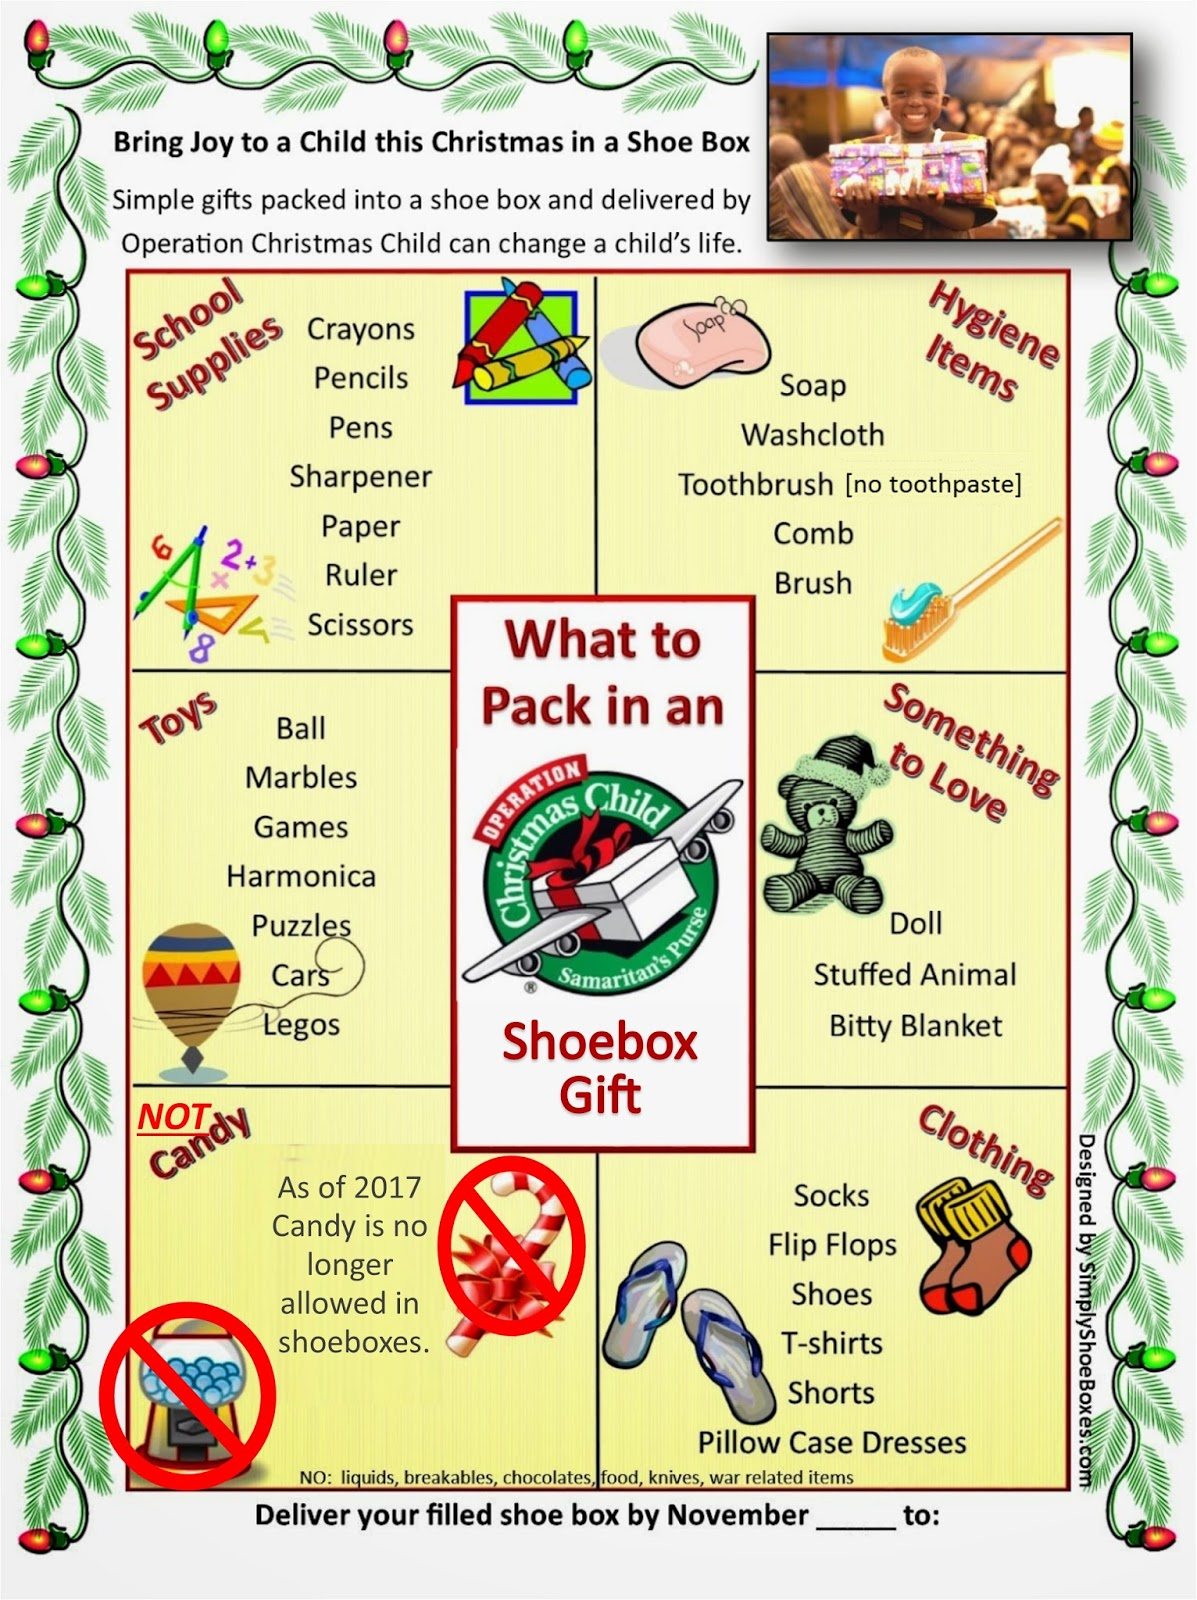 Operation Christmas Child Letter Template - Simply Shoeboxes October 2014